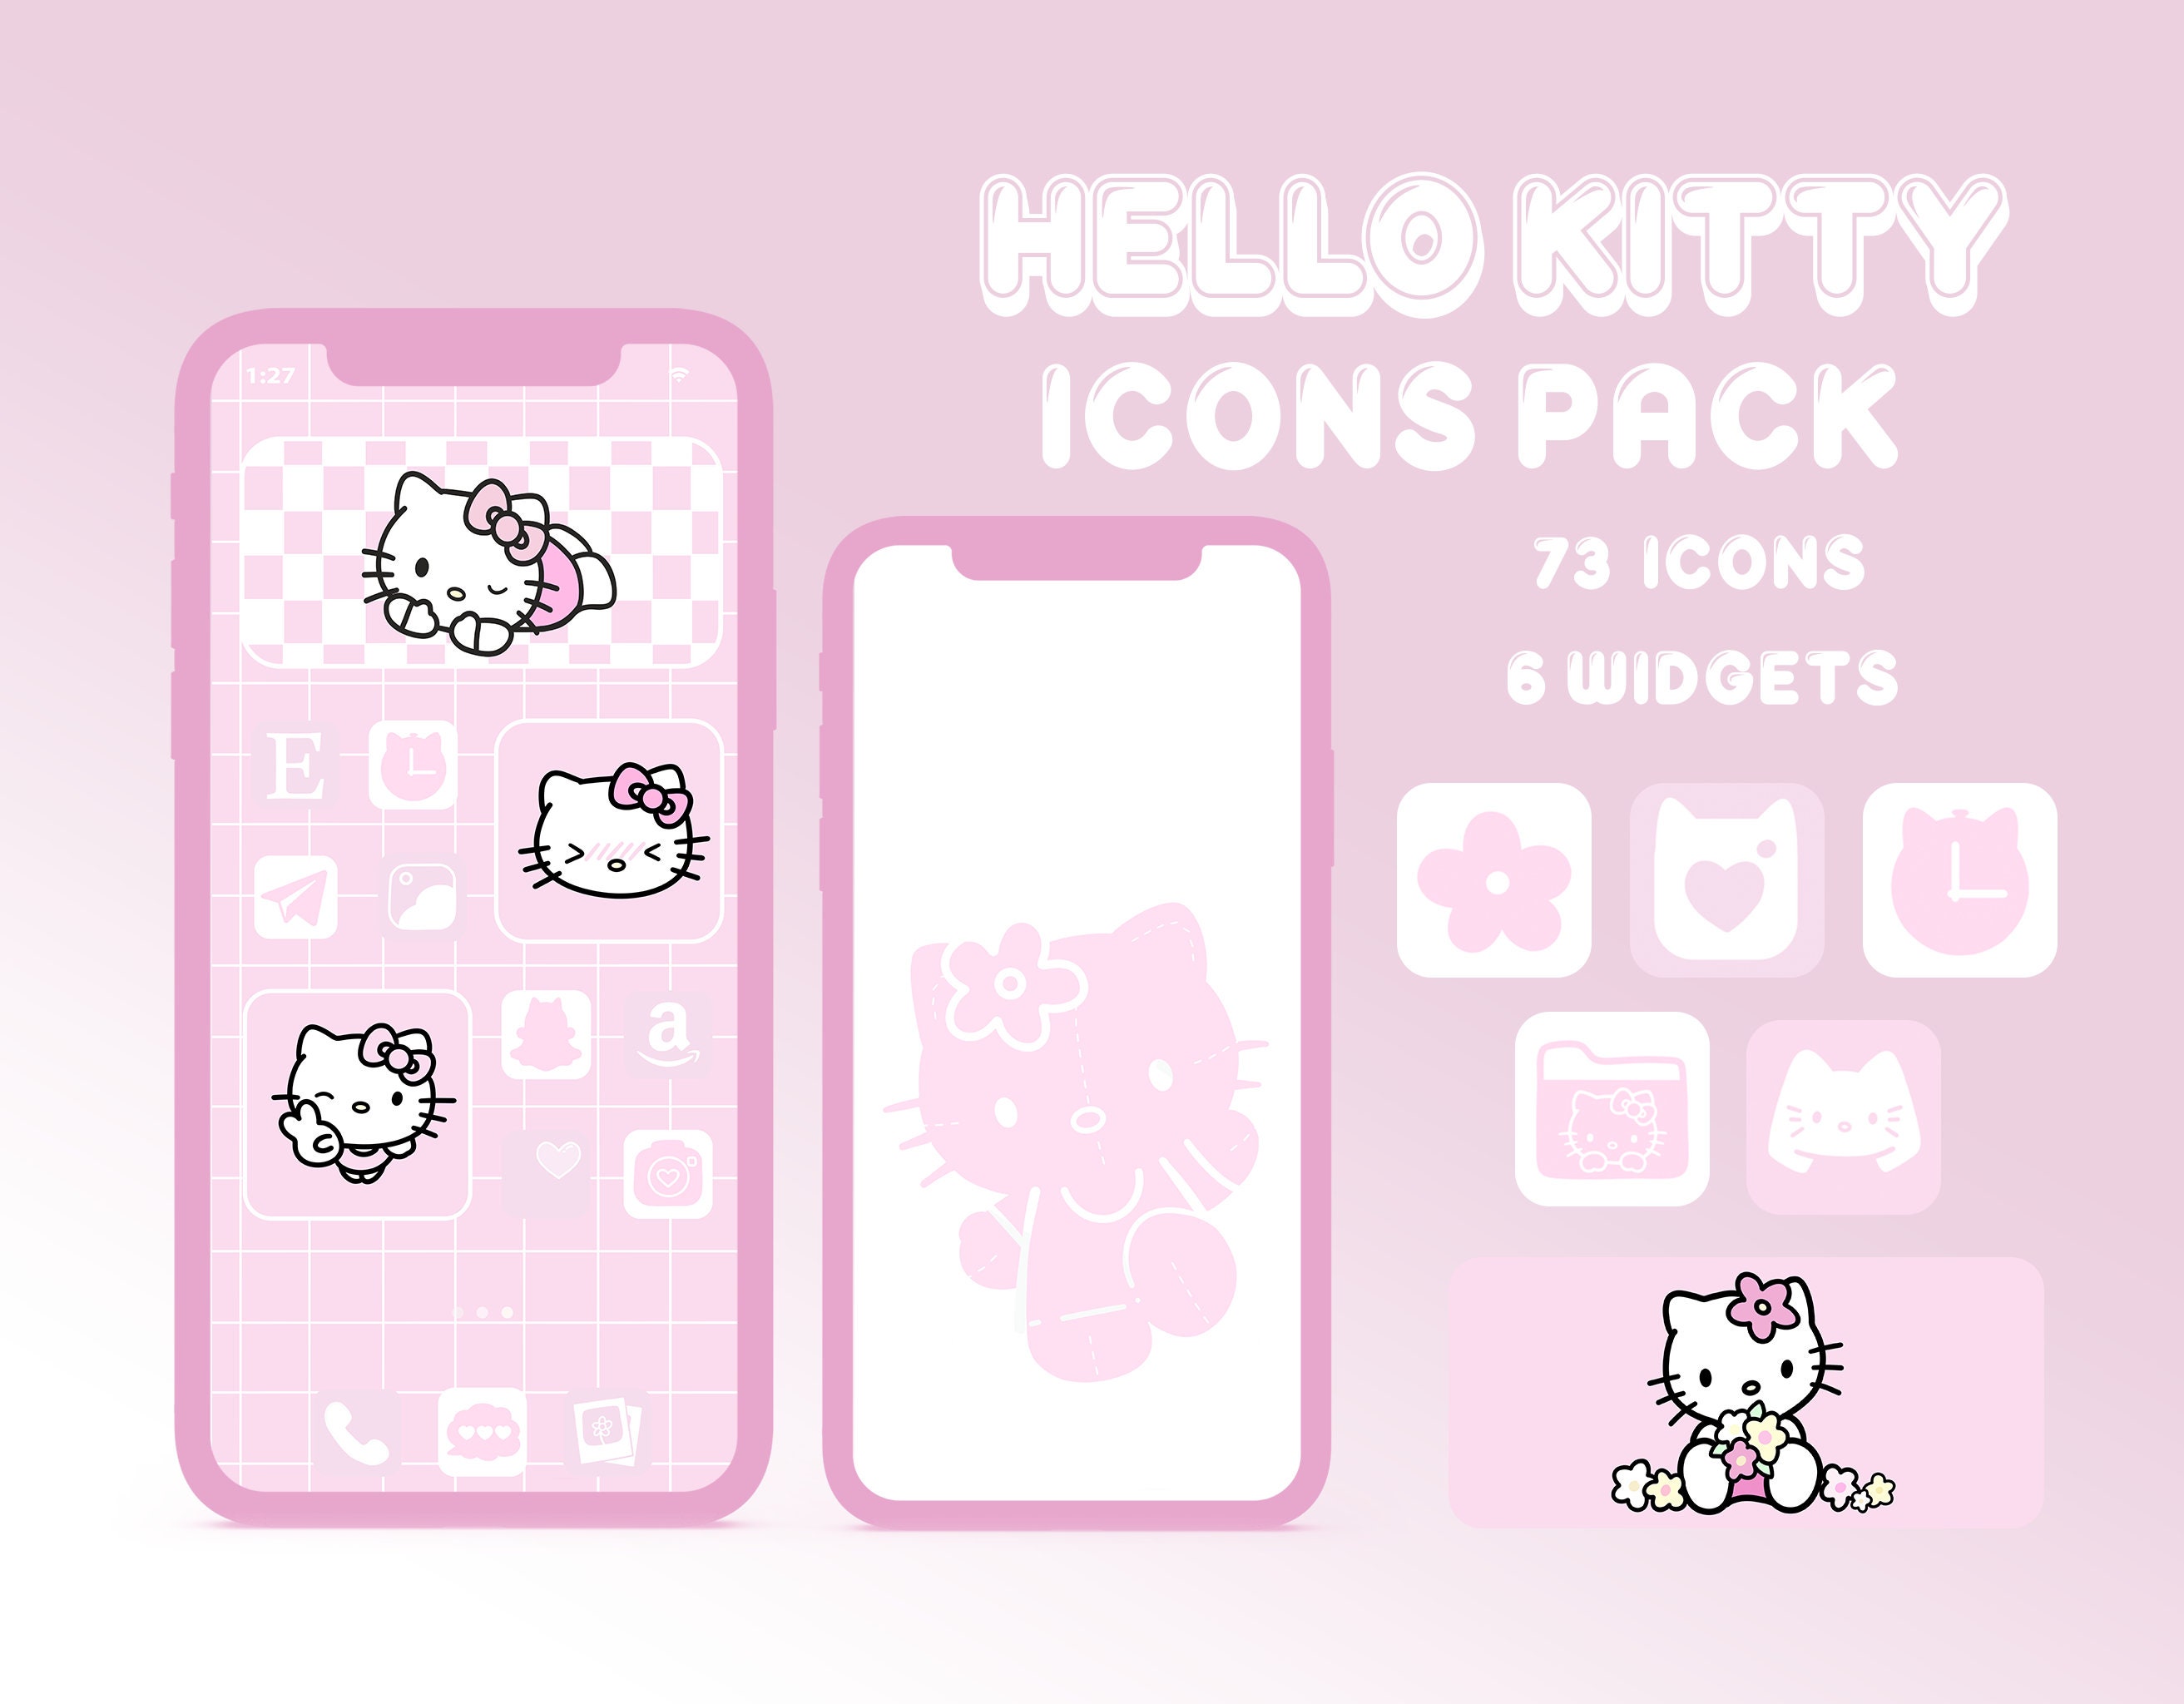 Hello Kitty female theme APK for Android Download